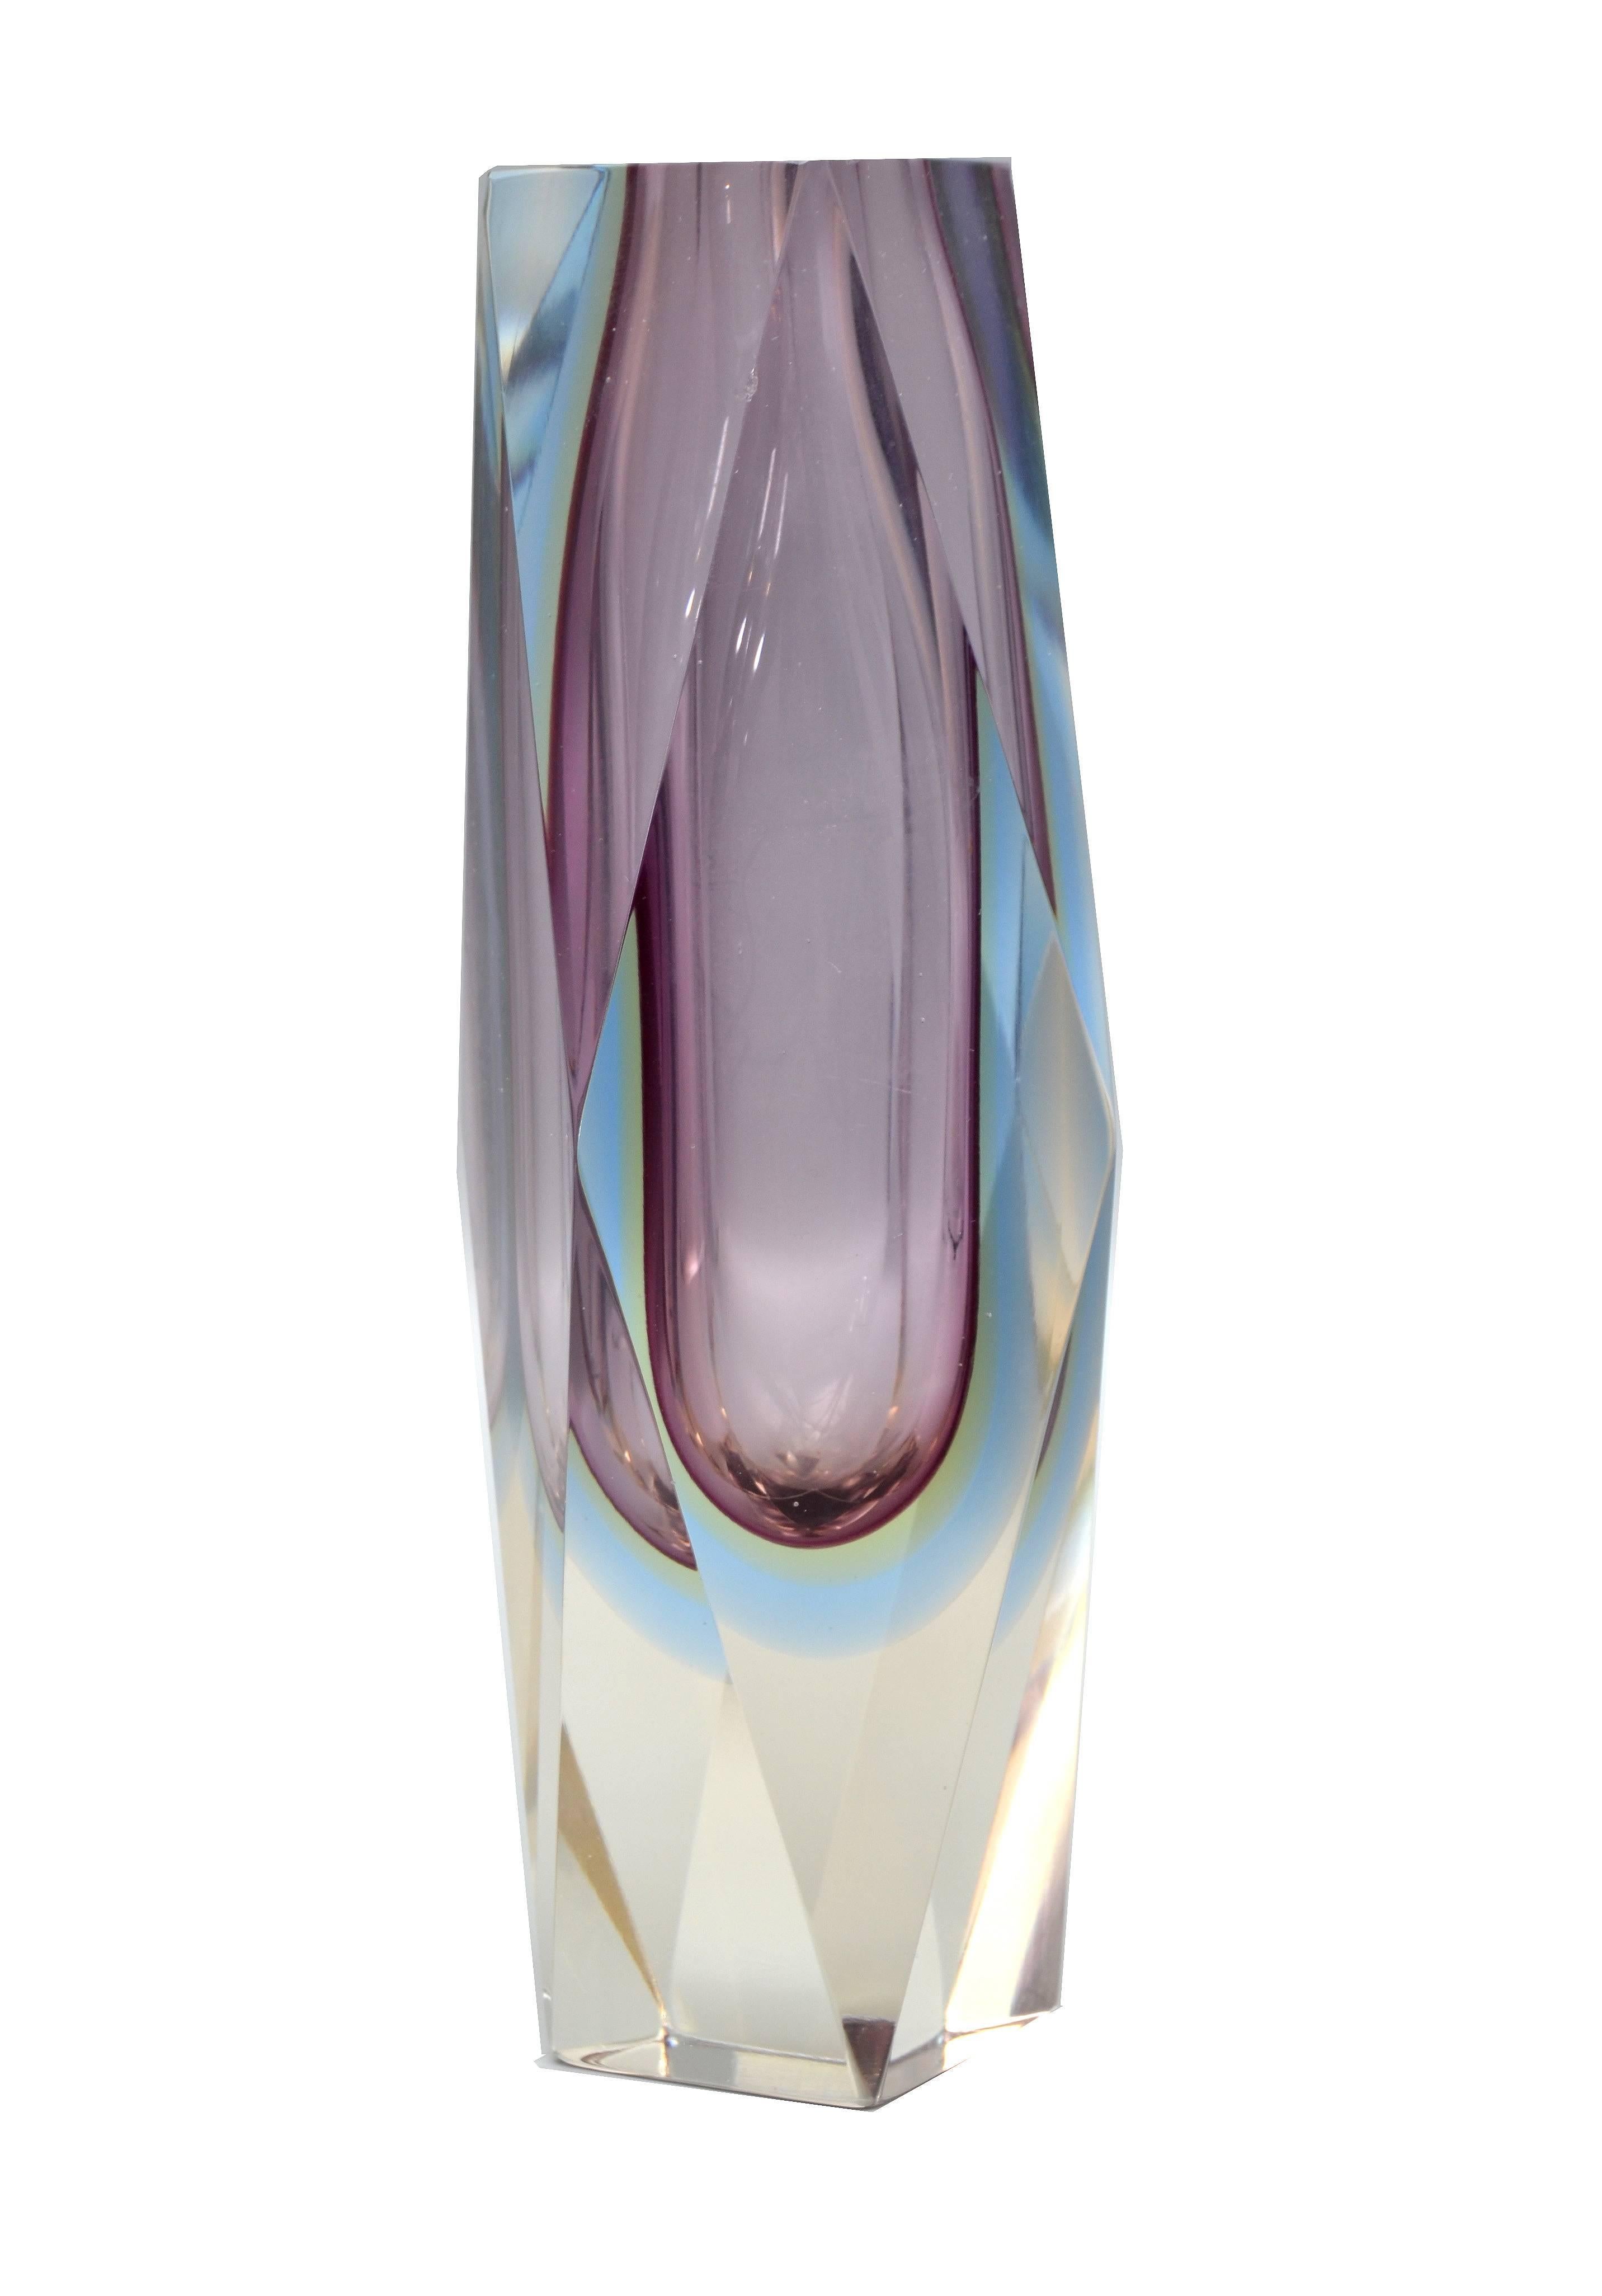 Stunning faceted Murano glass Sommerso art glass vase.
Looks amazing from any angle.
No markings.